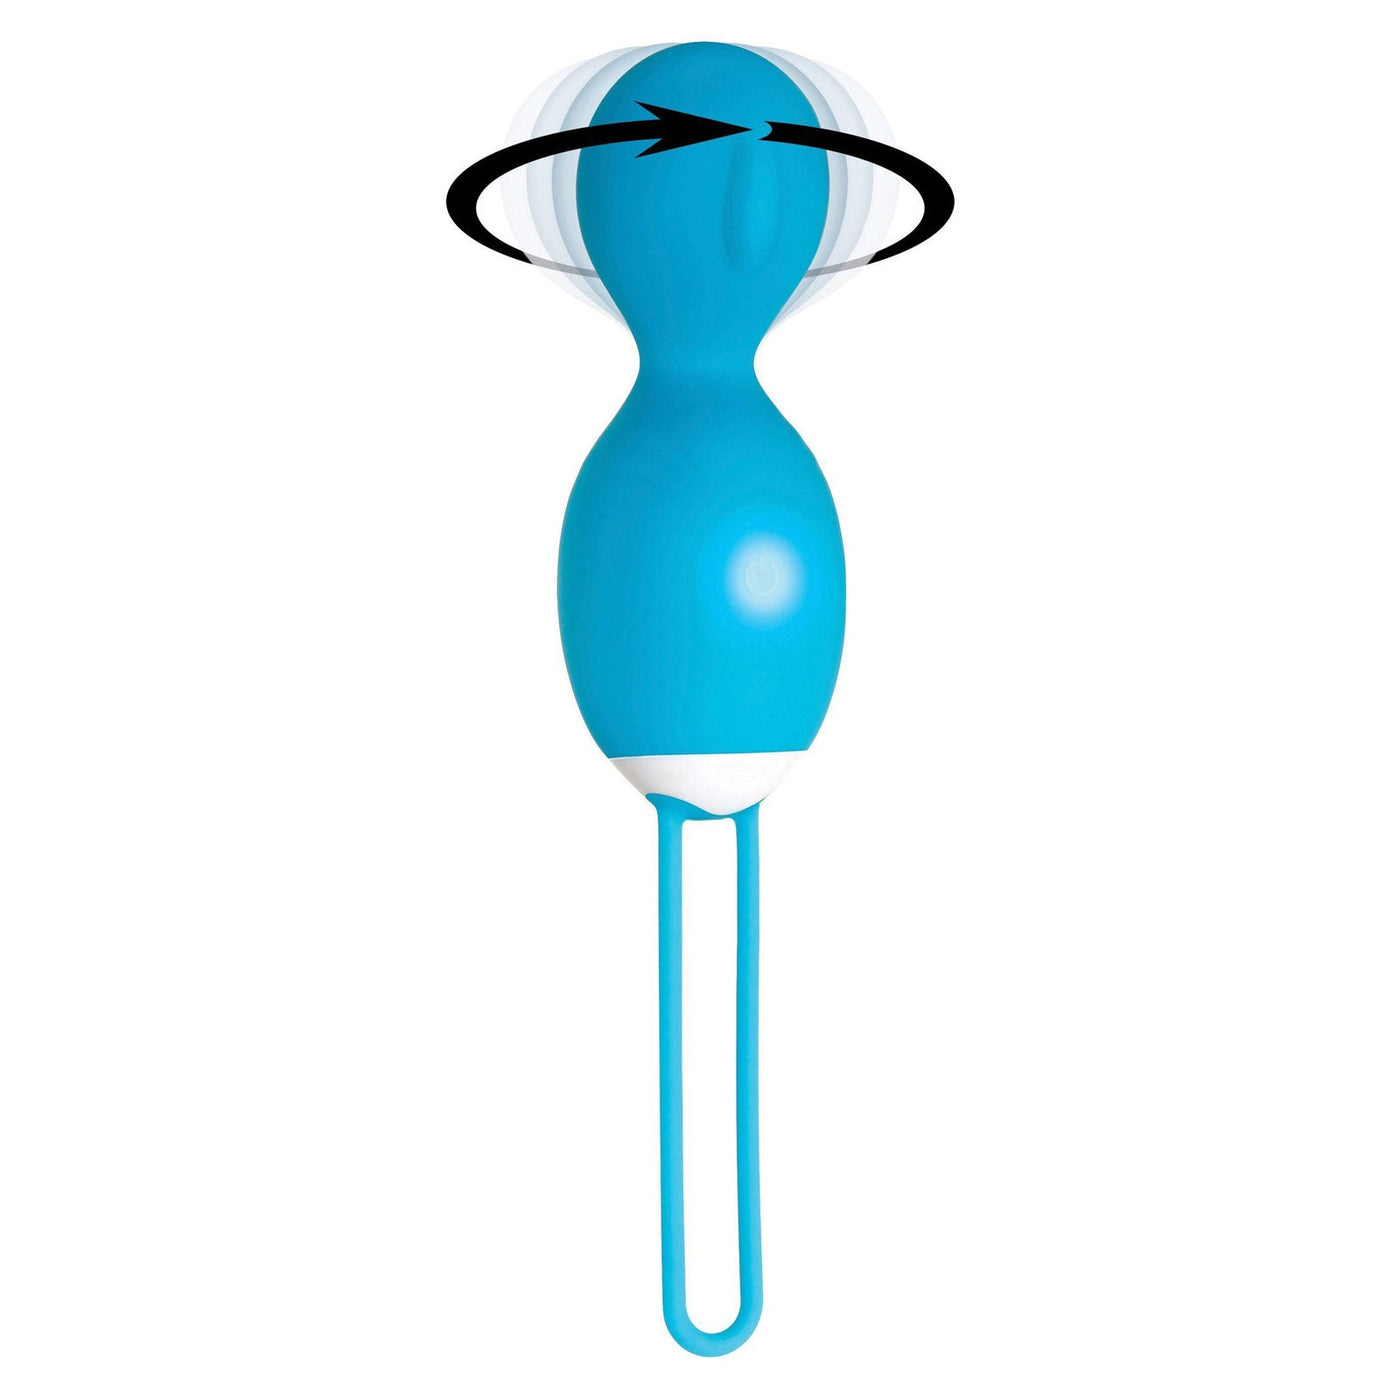 Twistin’ The Night Away Rechargeable Remote Control Egg Vibrators Evolved Novelties 